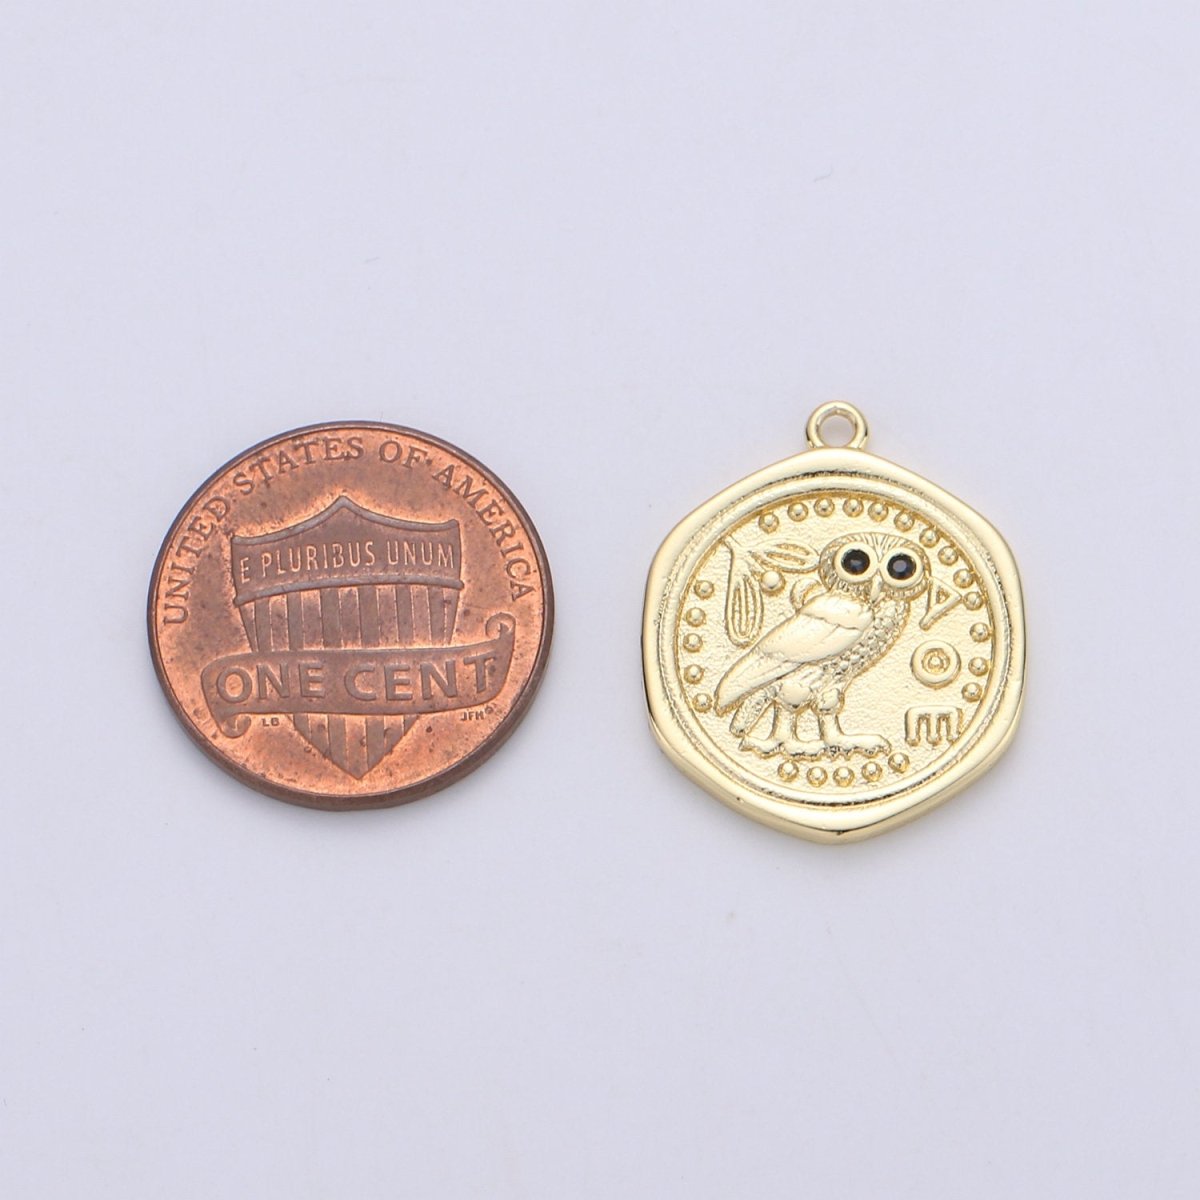 Dainty Owl Medallion Coin Pendant Gold Filled Round Owl Charm Owl Medallion Bird Pendant Charms 22x18mm C-909 - DLUXCA